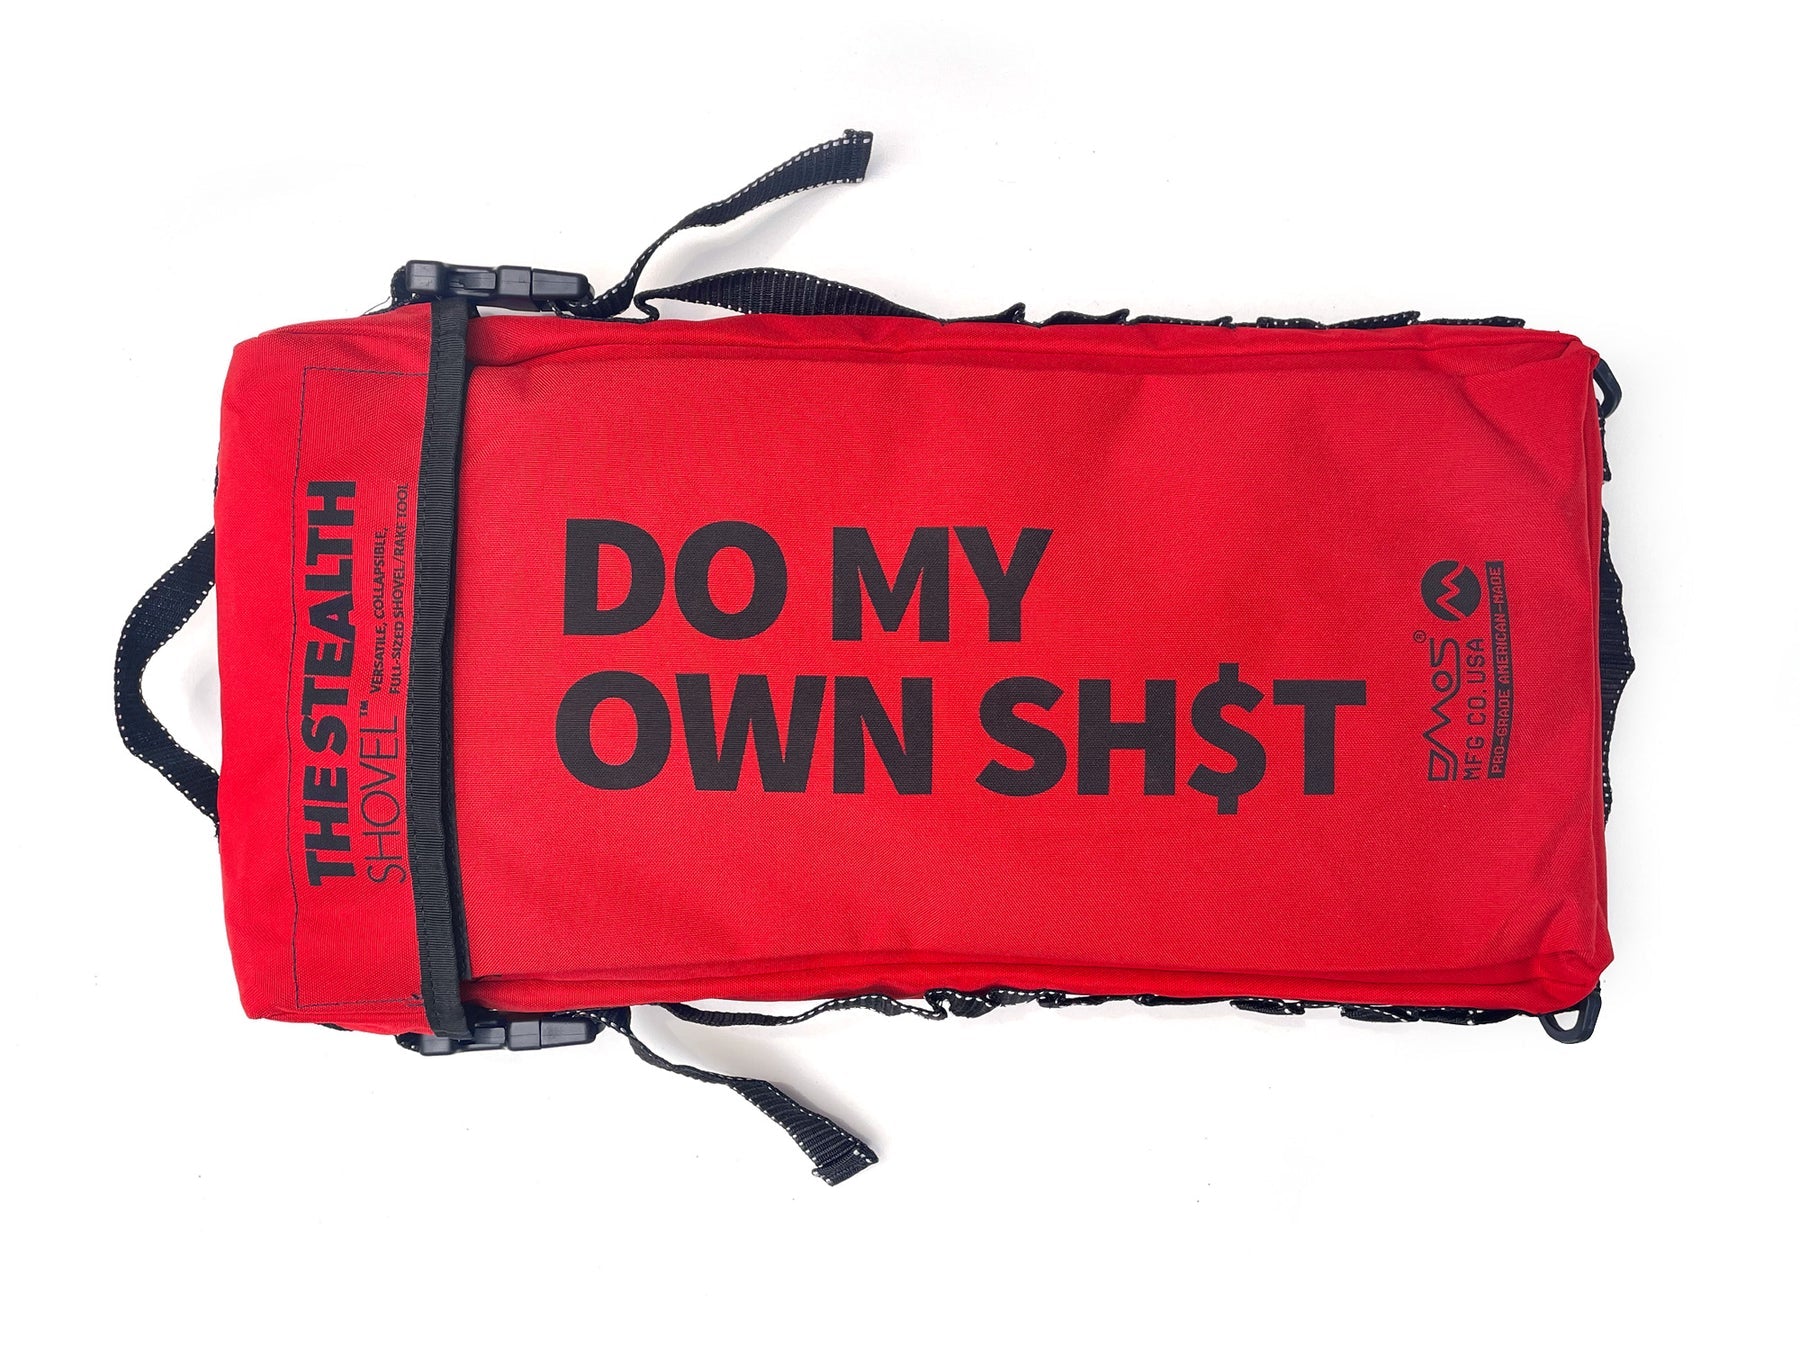 DMOS Stealth Everyday Carry Bag - Red